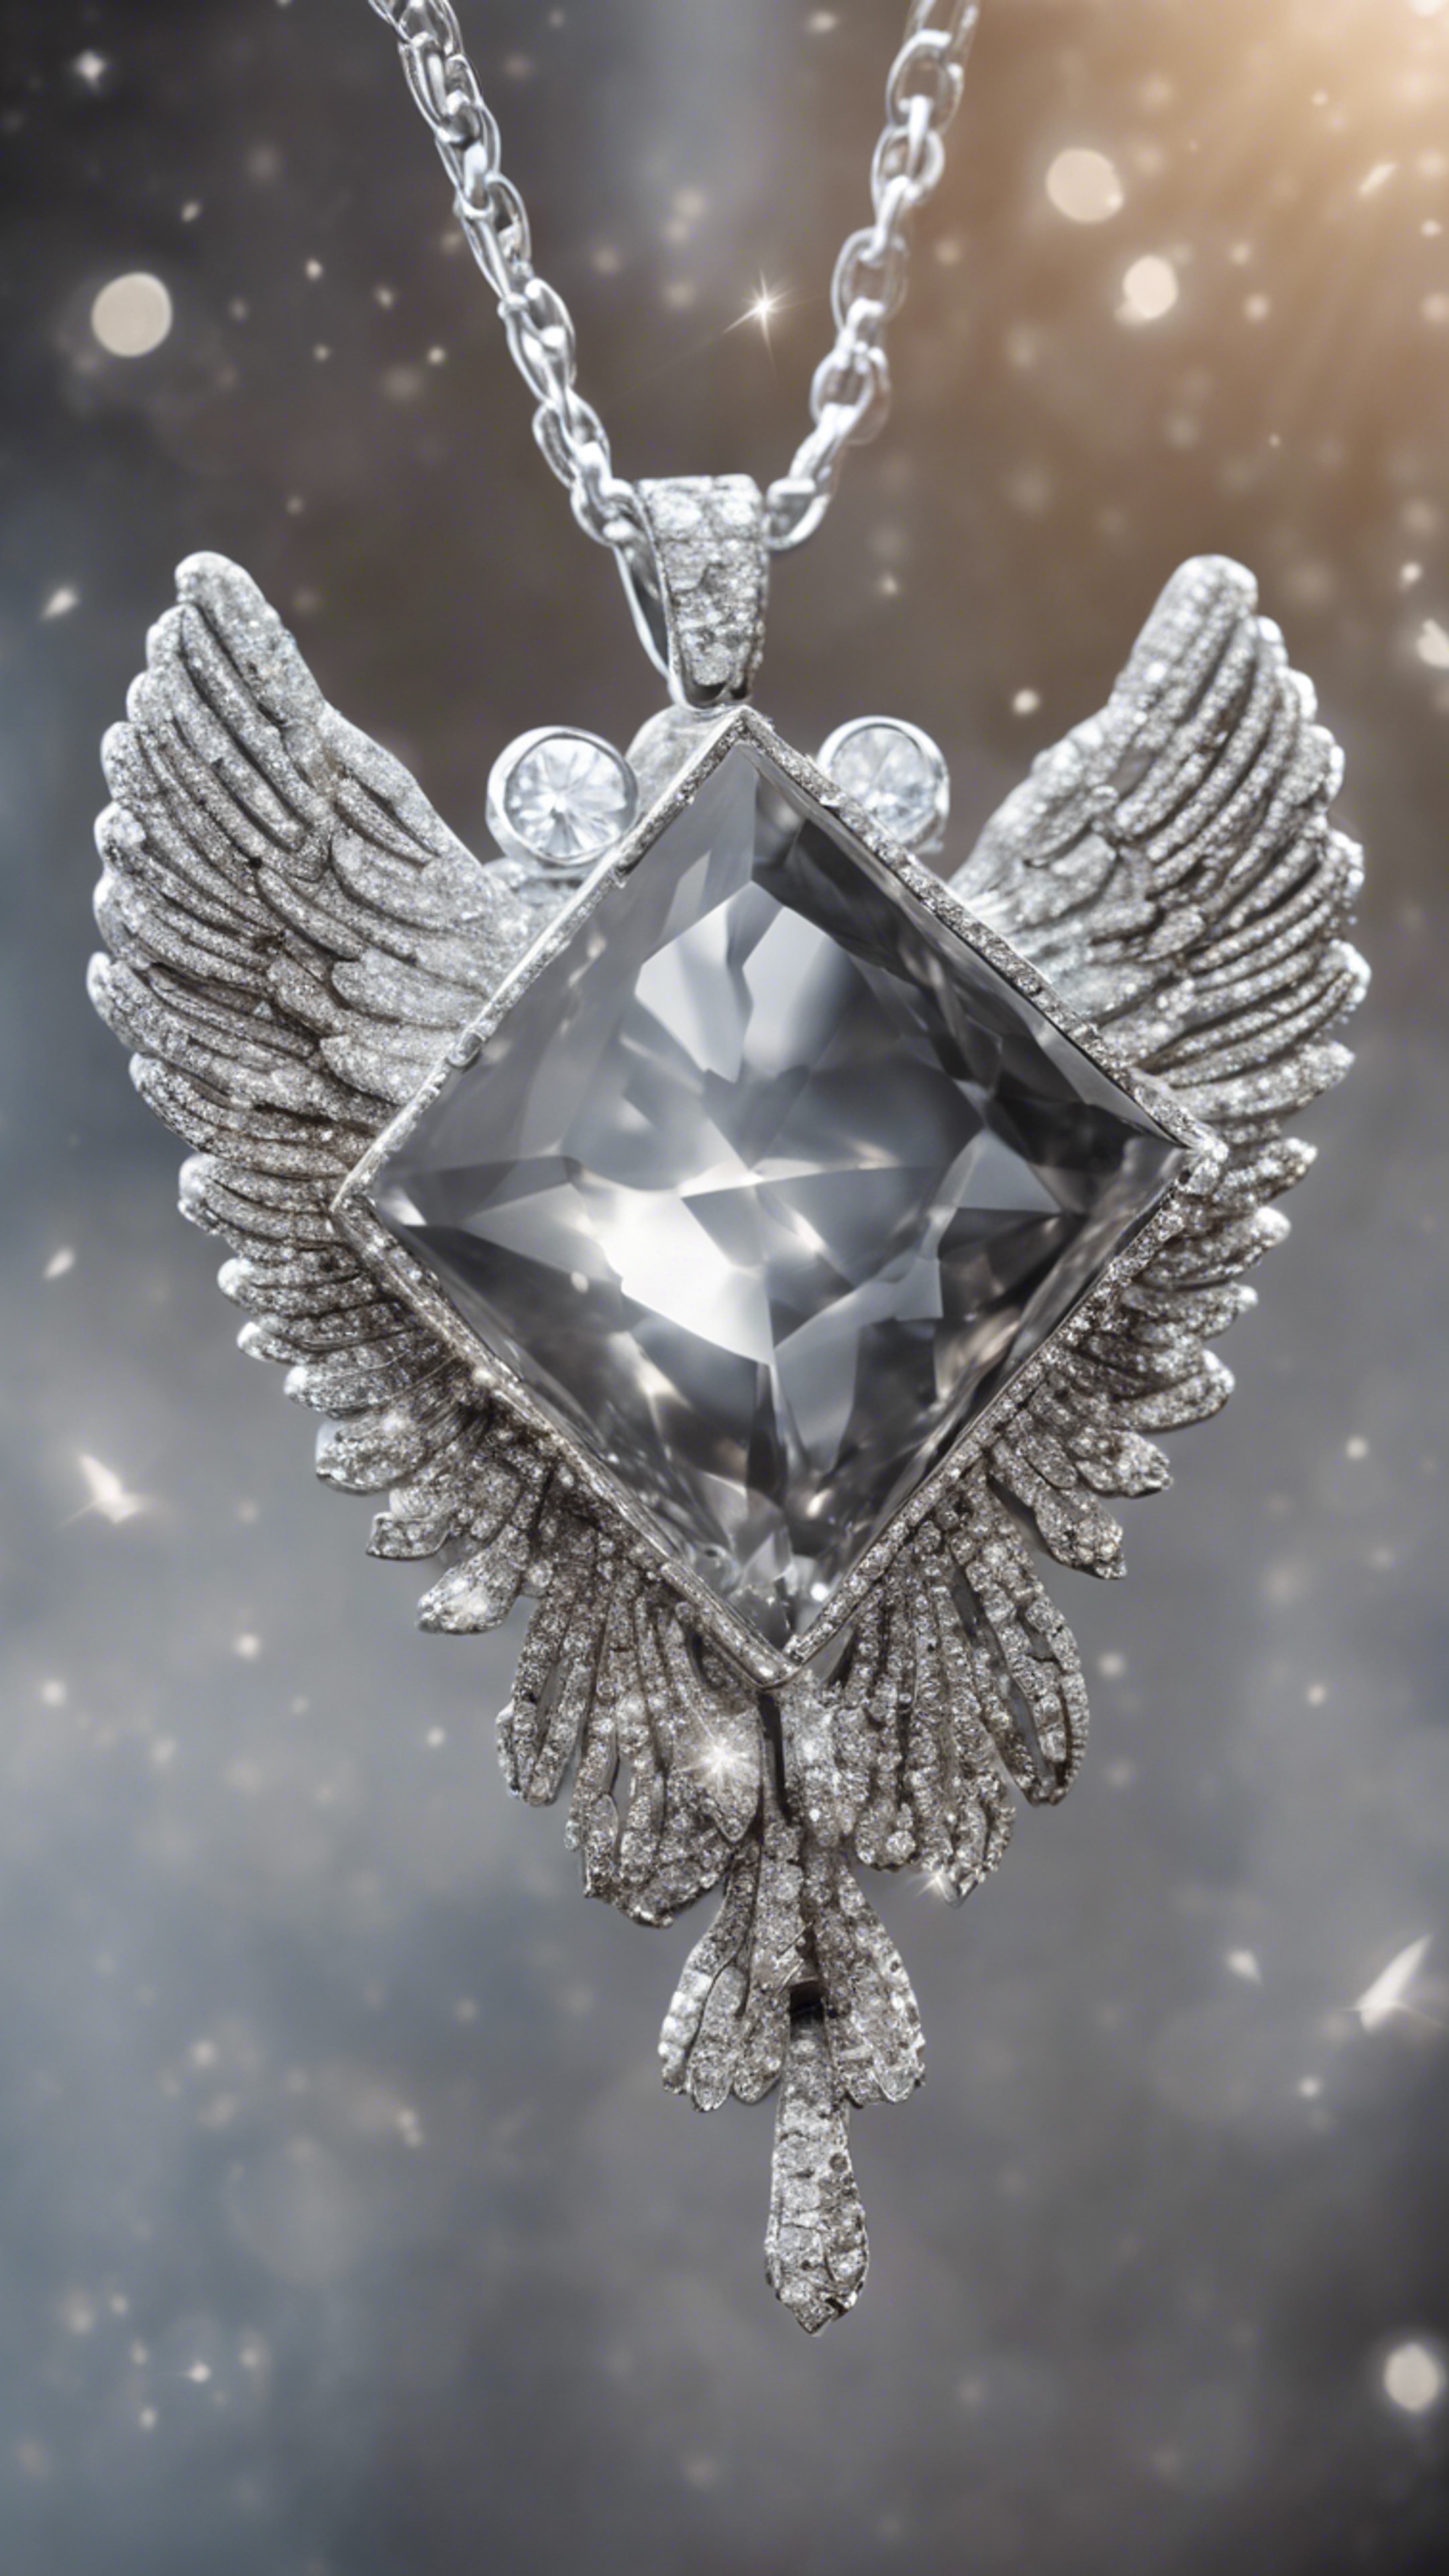 A gray diamond wrapped in the wings of a silver angel pendant. Kertas dinding[ad1b9e387c144e34b8b5]